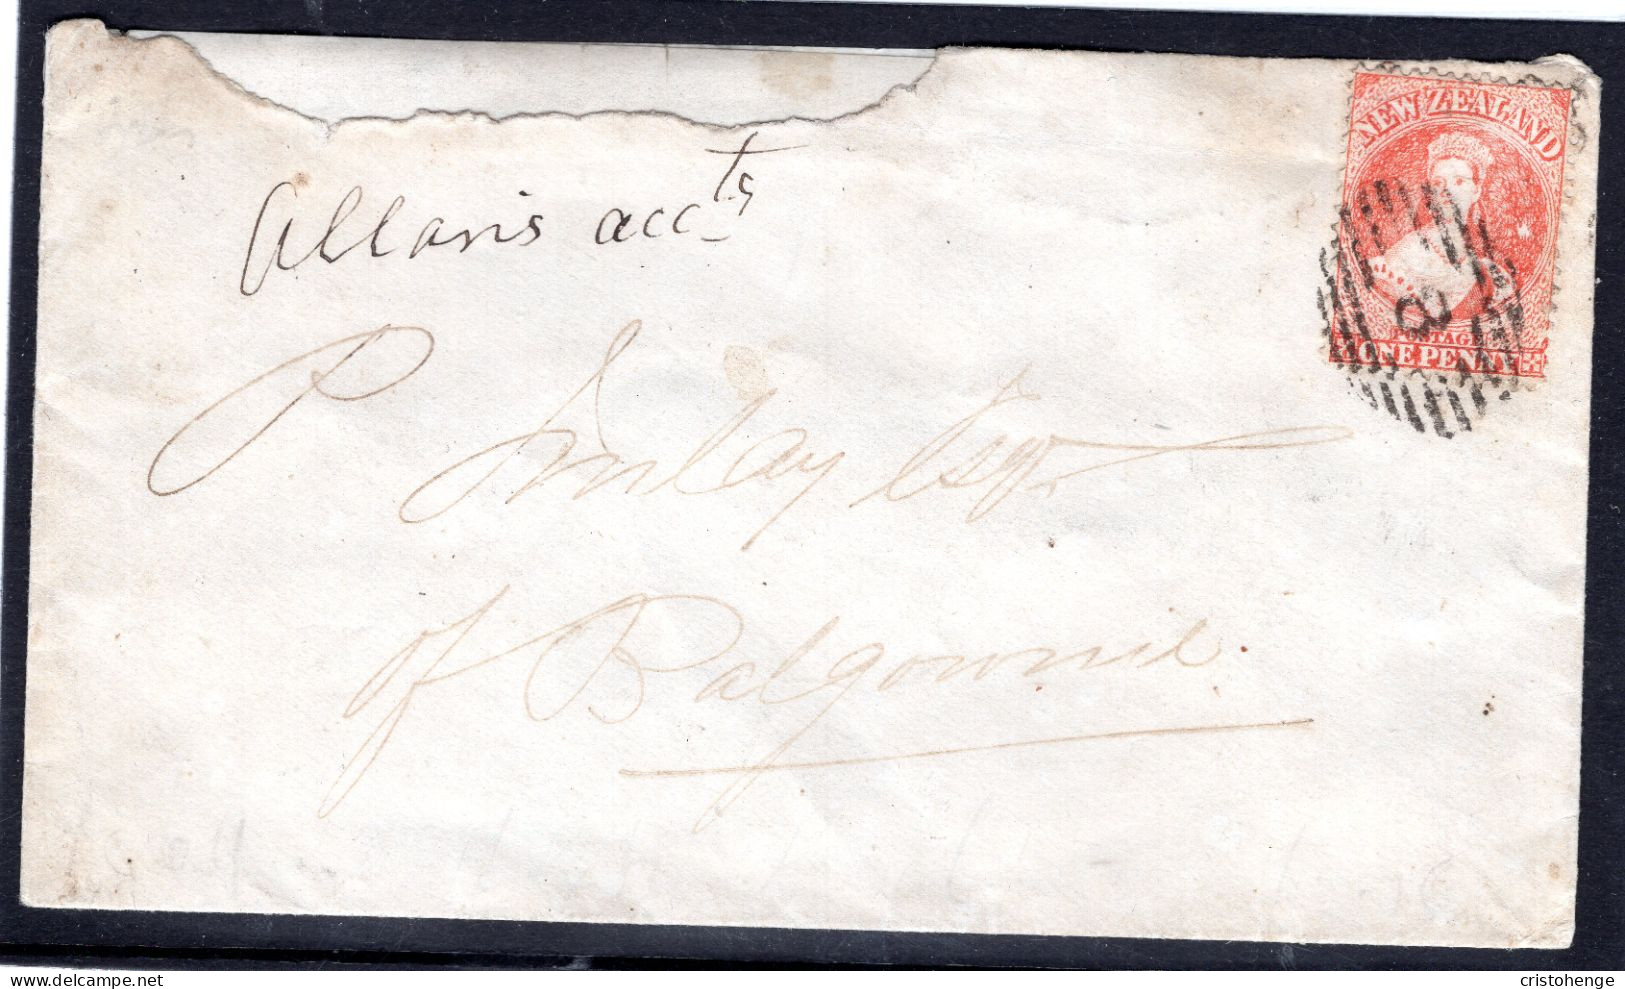 New Zealand 1869 1d Drop Rate FFQ Chalon Cover Sent Within Wanganui - Storia Postale